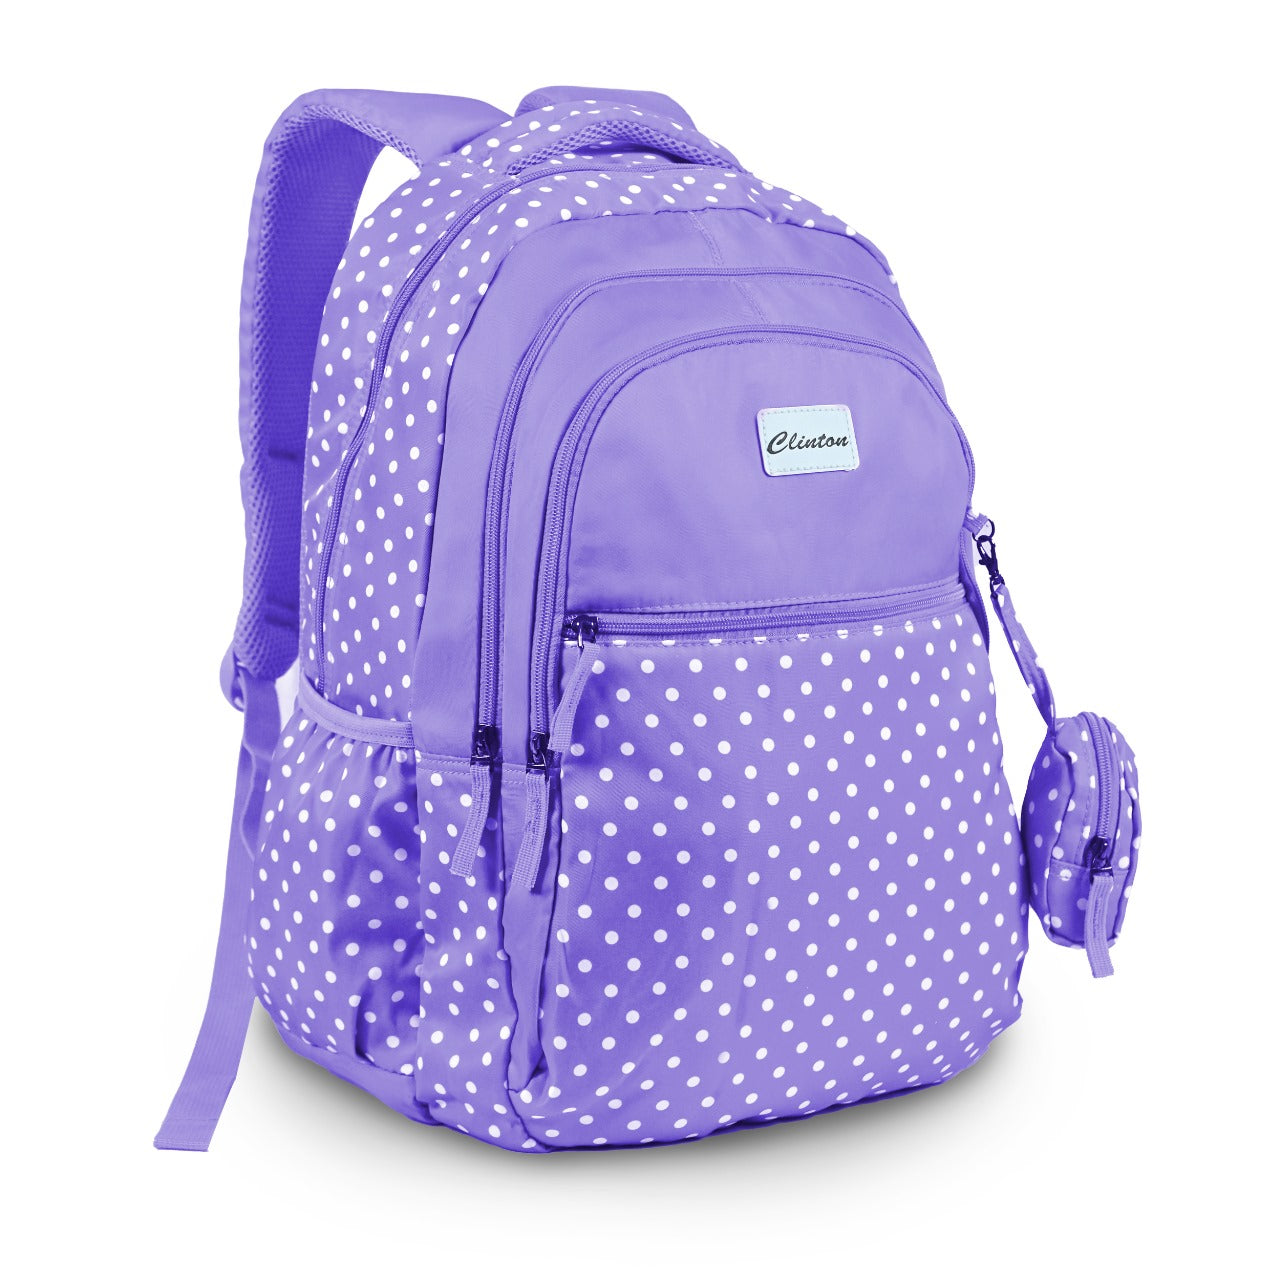 Espiral Polka Dotted Multi Zipper Backpack Bag with Pouch Zaappy